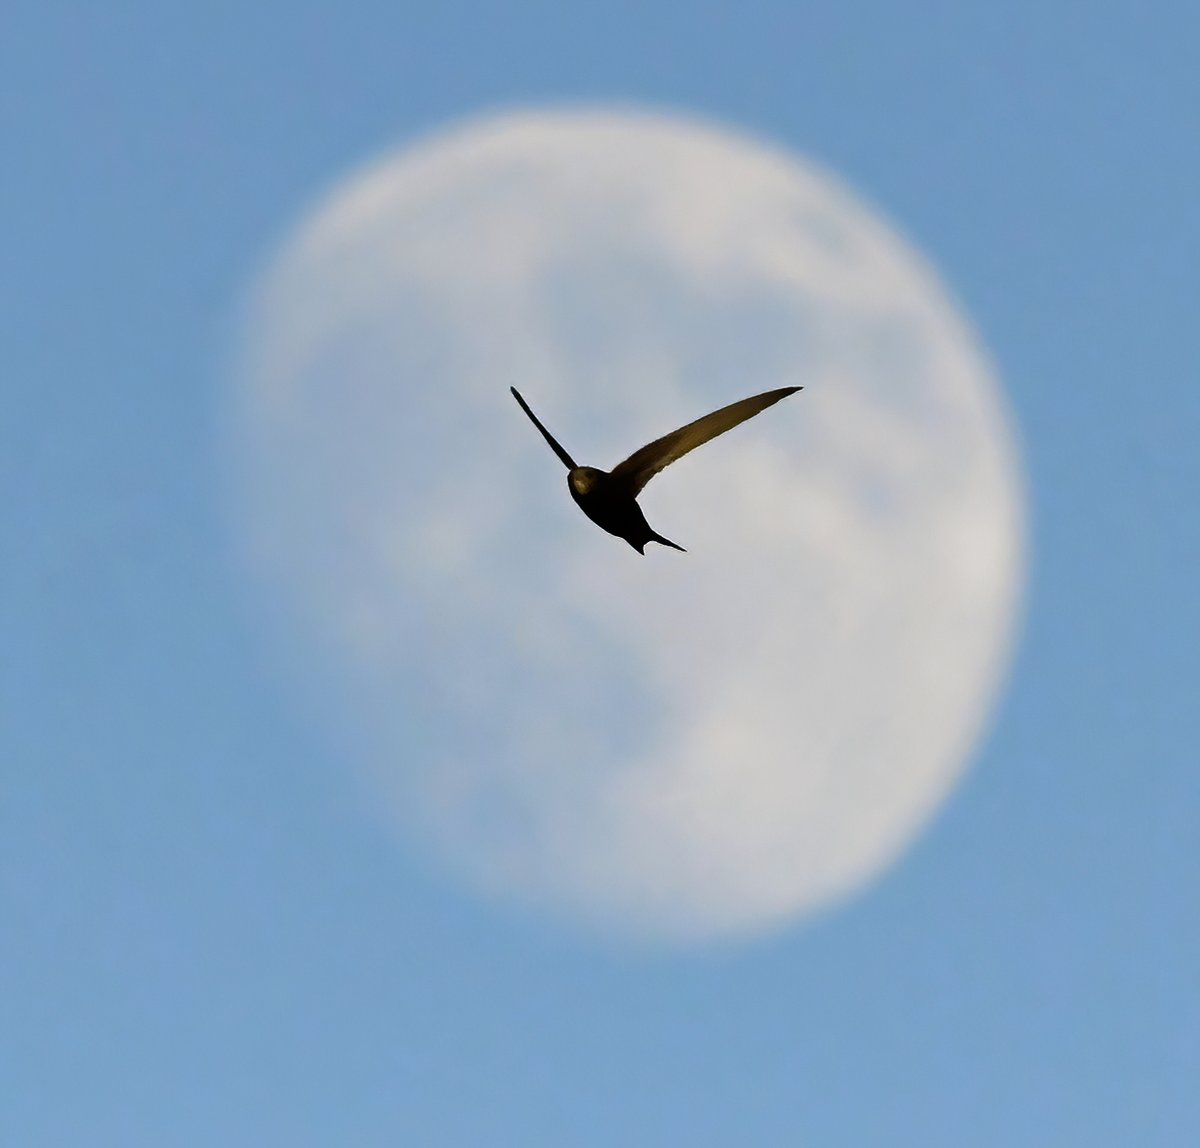 Swift moon. 🐦 I waited ages for the right moment this evening, my patience was rewarded. 😊